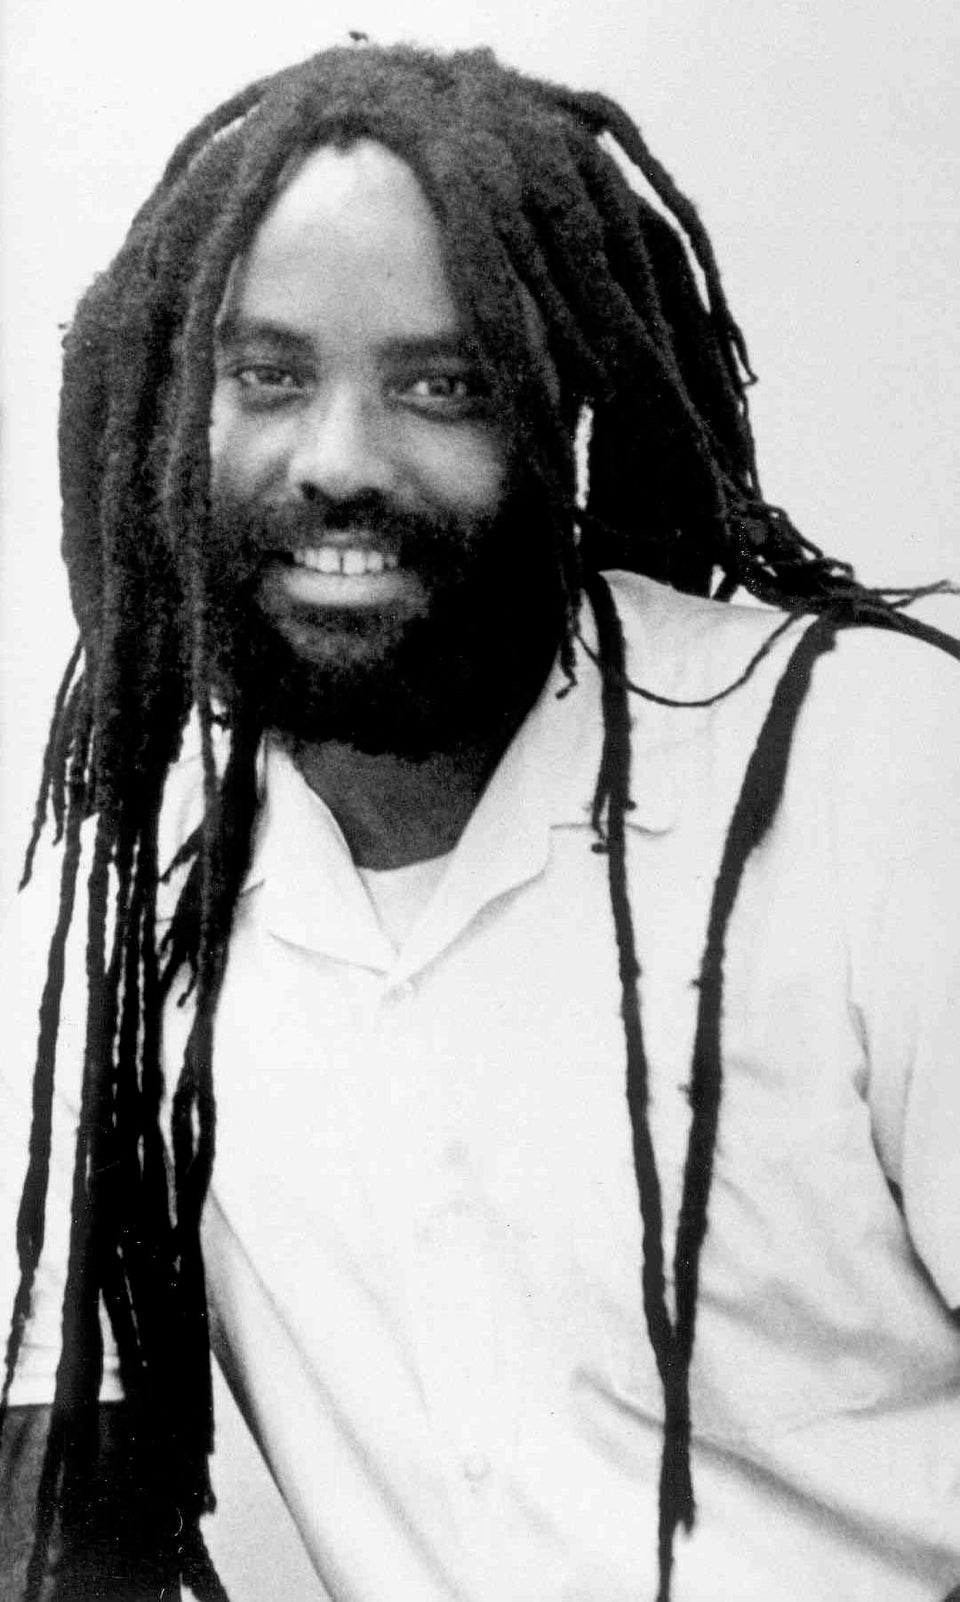 Judge Rules Mumia Abu-Jamal Can Reargue Appeal To The Pennsylvania Supreme Court